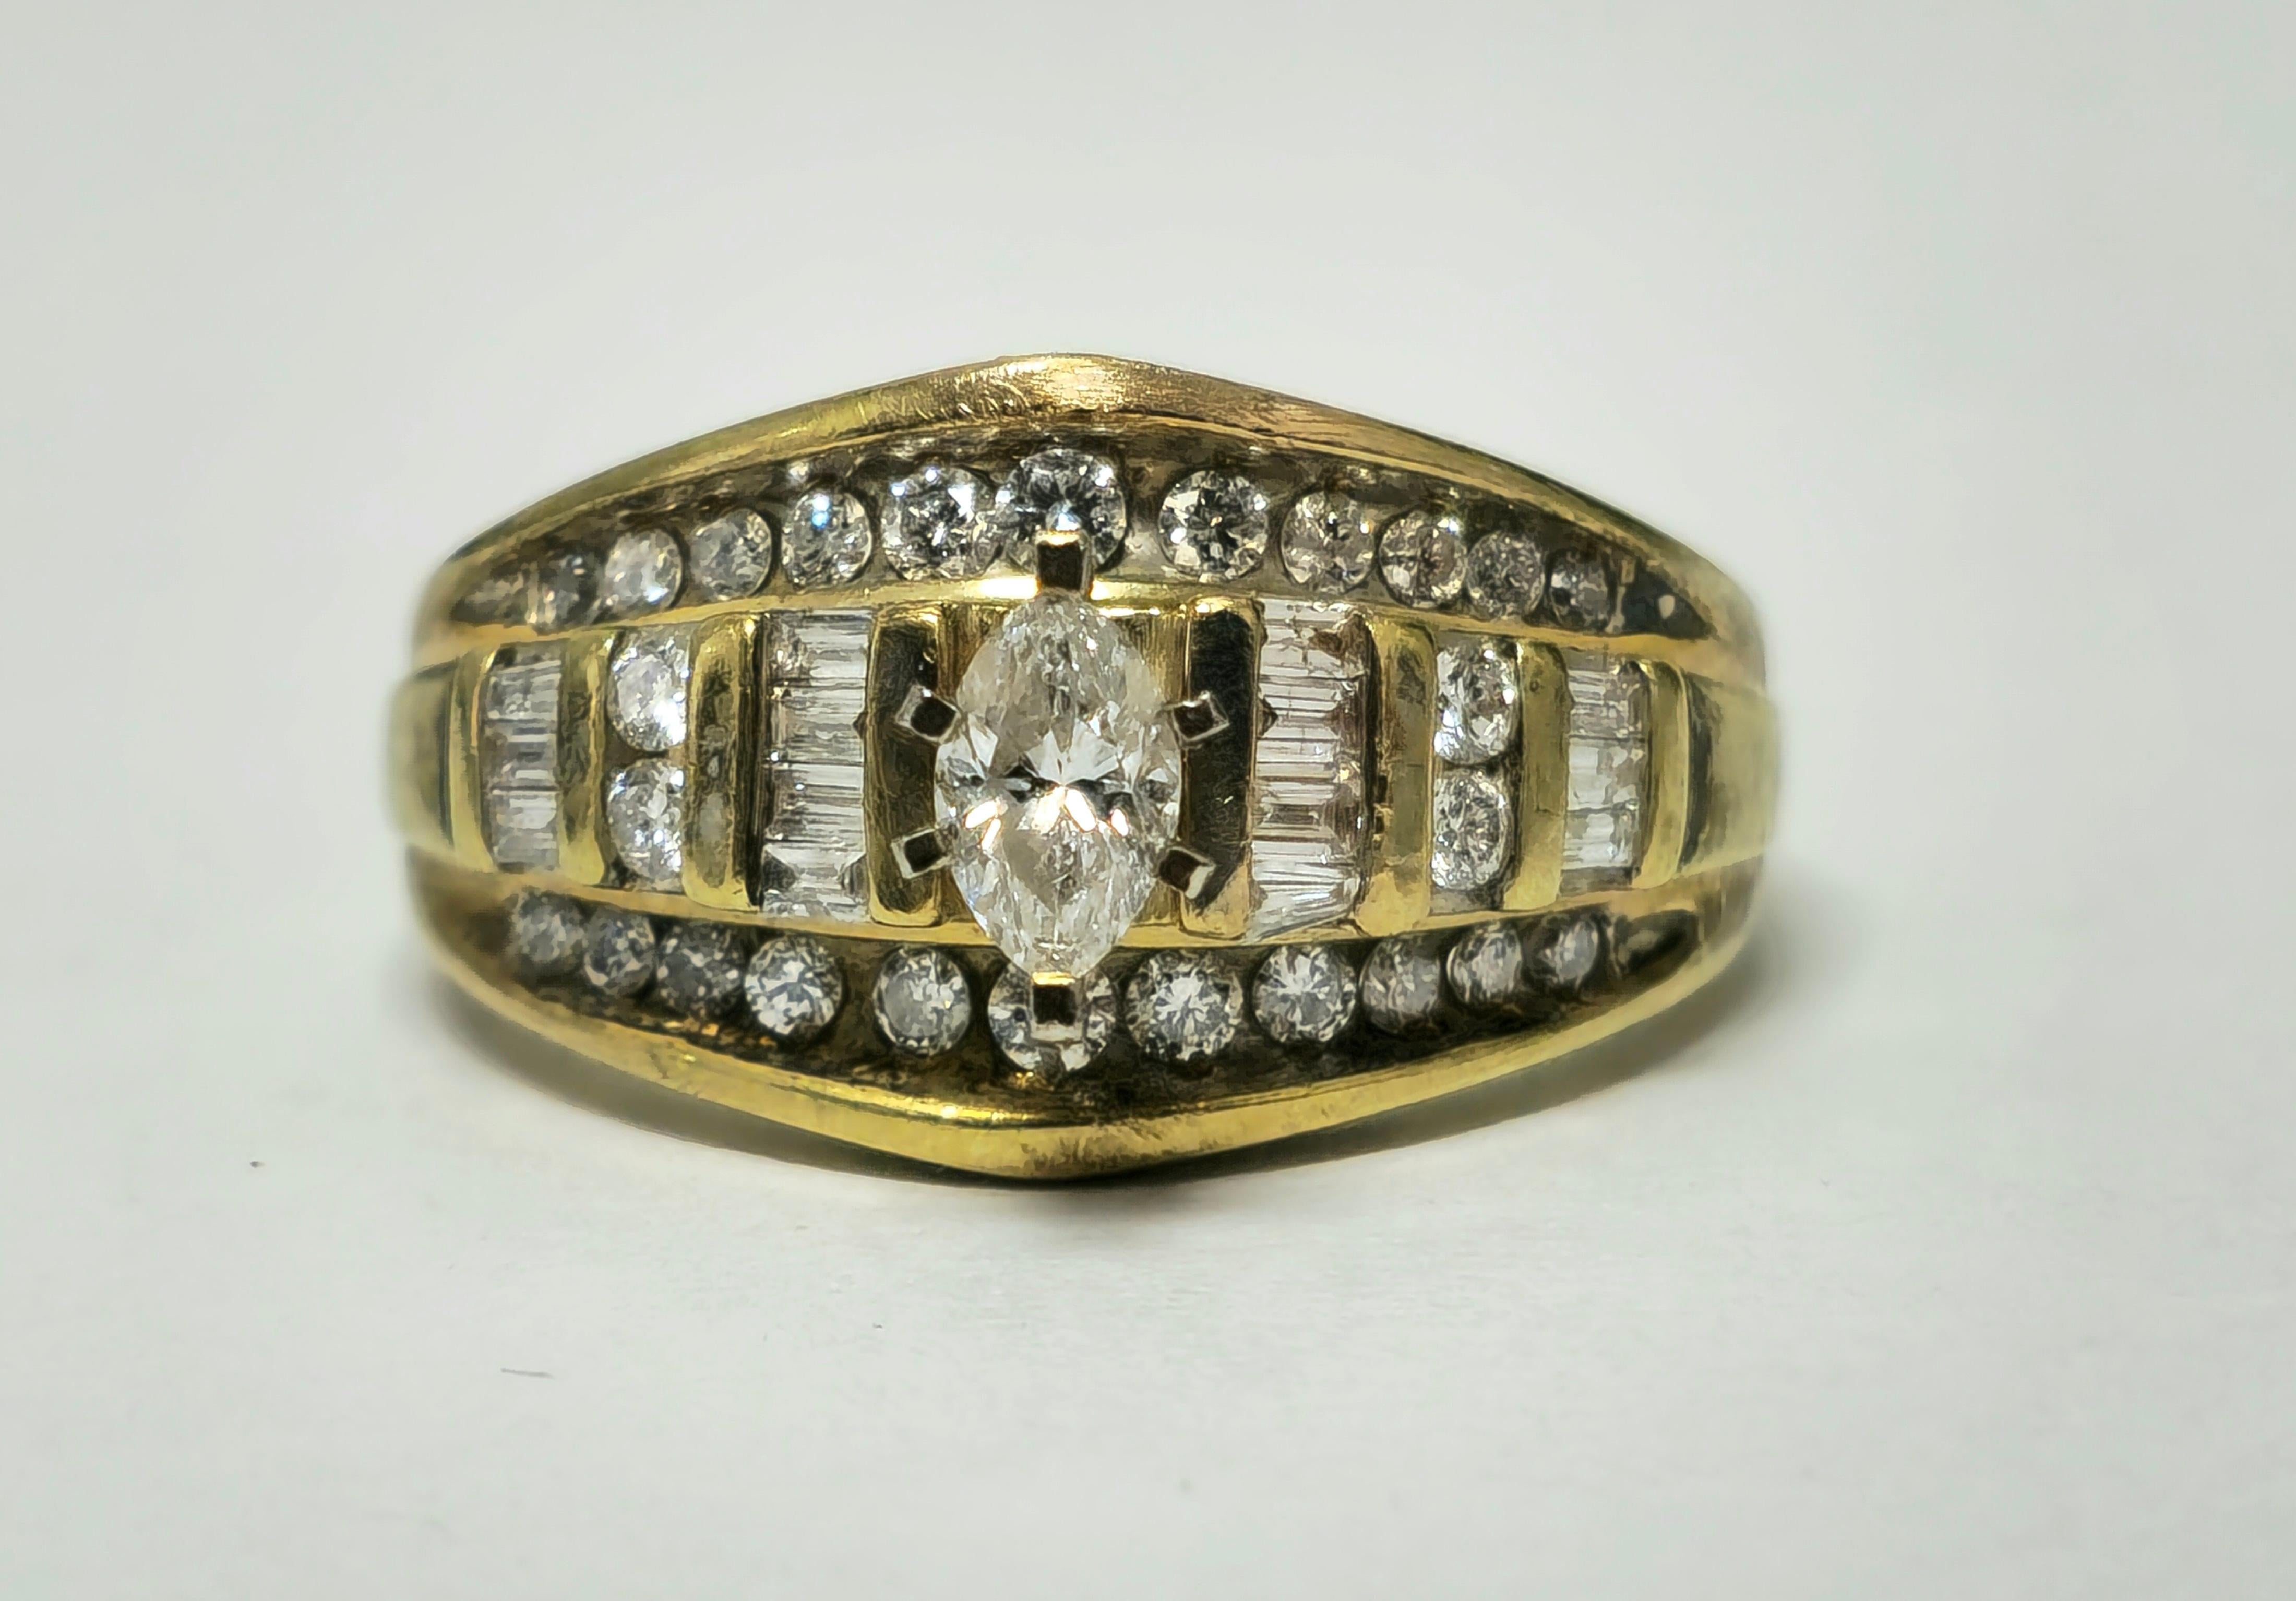 Vintage Collectible 2.90 Carat Diamond Engagement Ring 14k Gold In Excellent Condition For Sale In Miami, FL